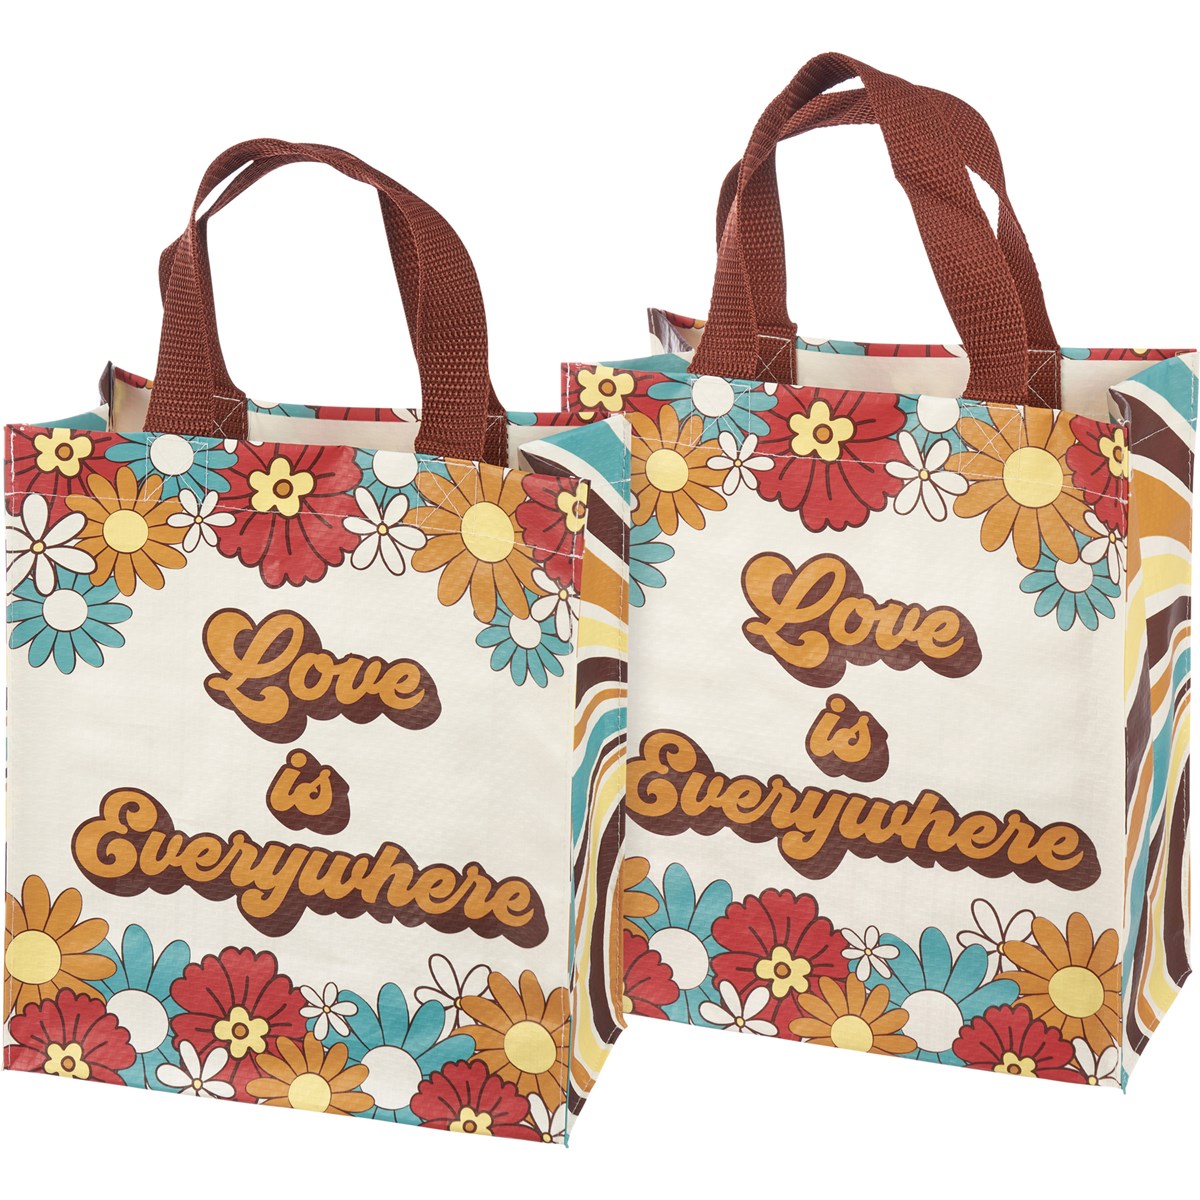 Daily Tote - Love Is Everywhere - 8.75" x 10.25" x 4.75" - Post-Consumer Material, Nylon